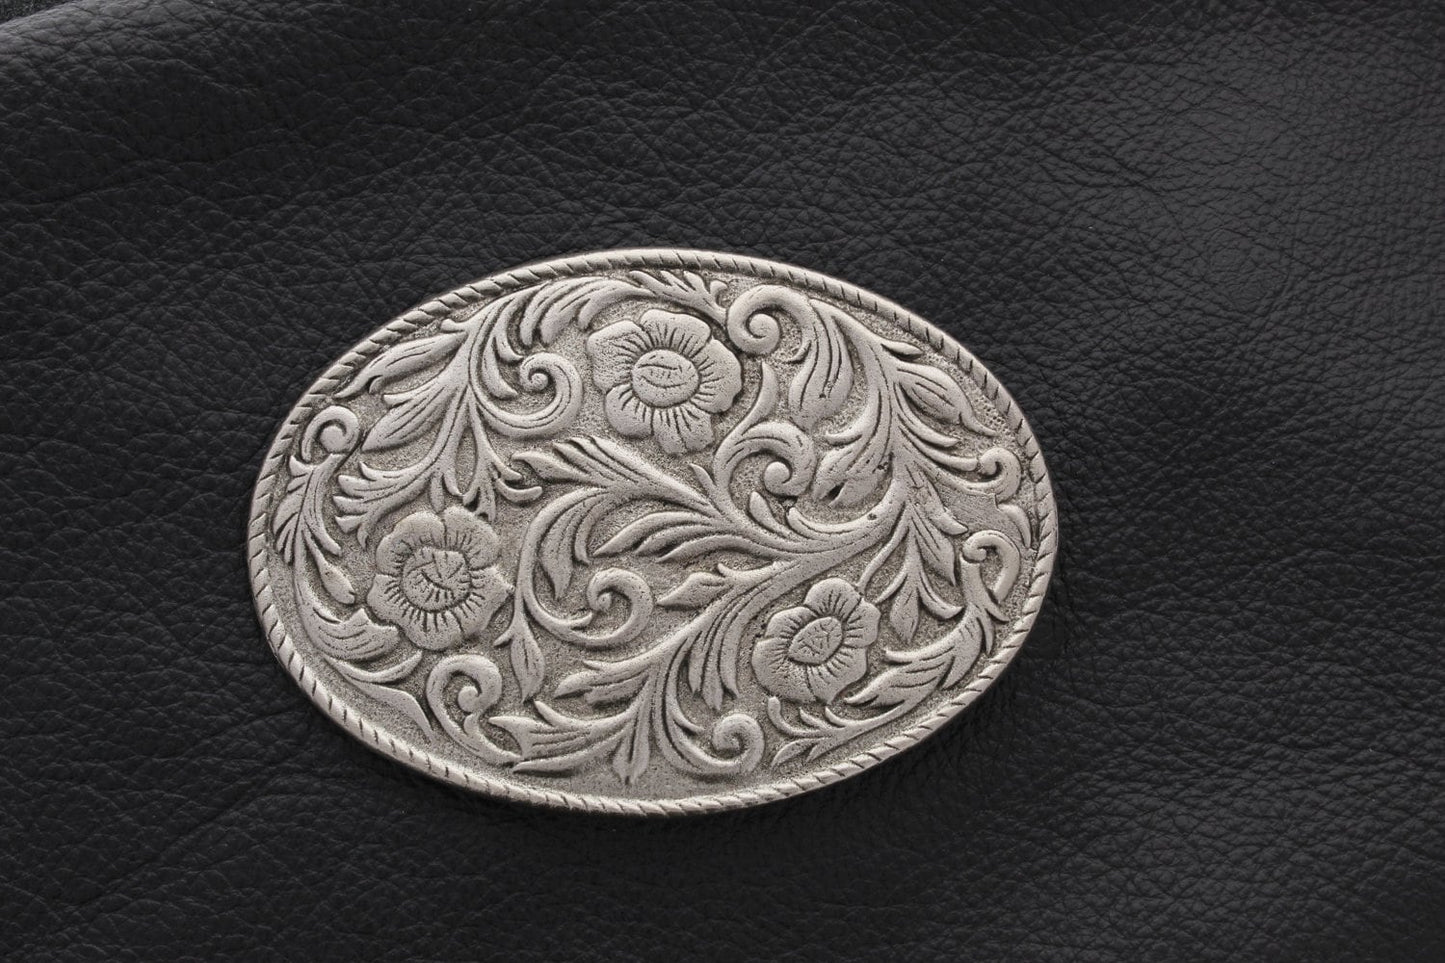 Belt Buckle, Oval, Interchangeable, Antique Silver, 3.5" long, 1.5" D ring, Made in USA, Each